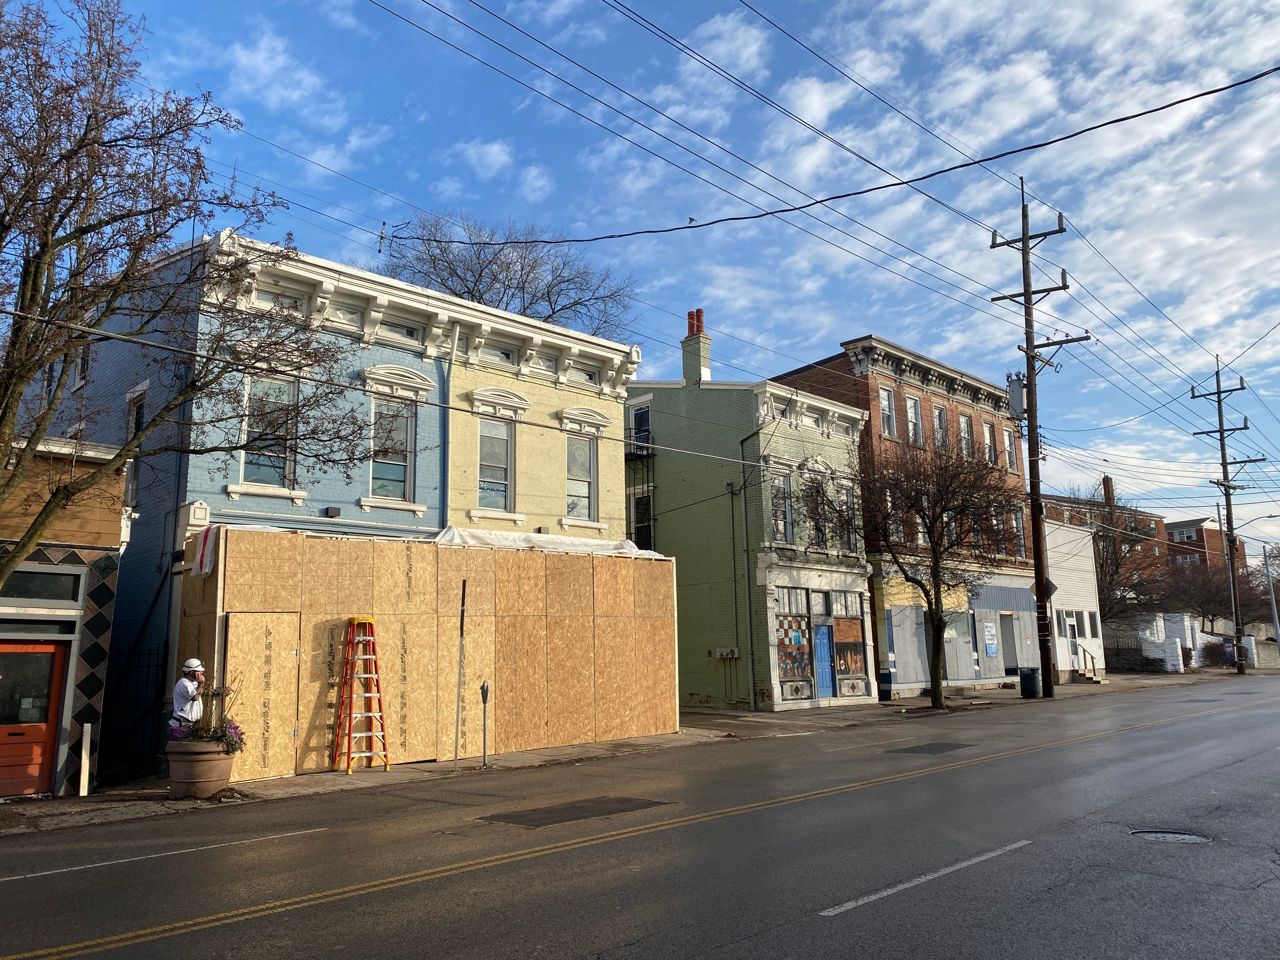 Some of the eight properties that are part of the Warsaw Avenue Creative Campus. (Spectrum News 1/Casey Weldon)